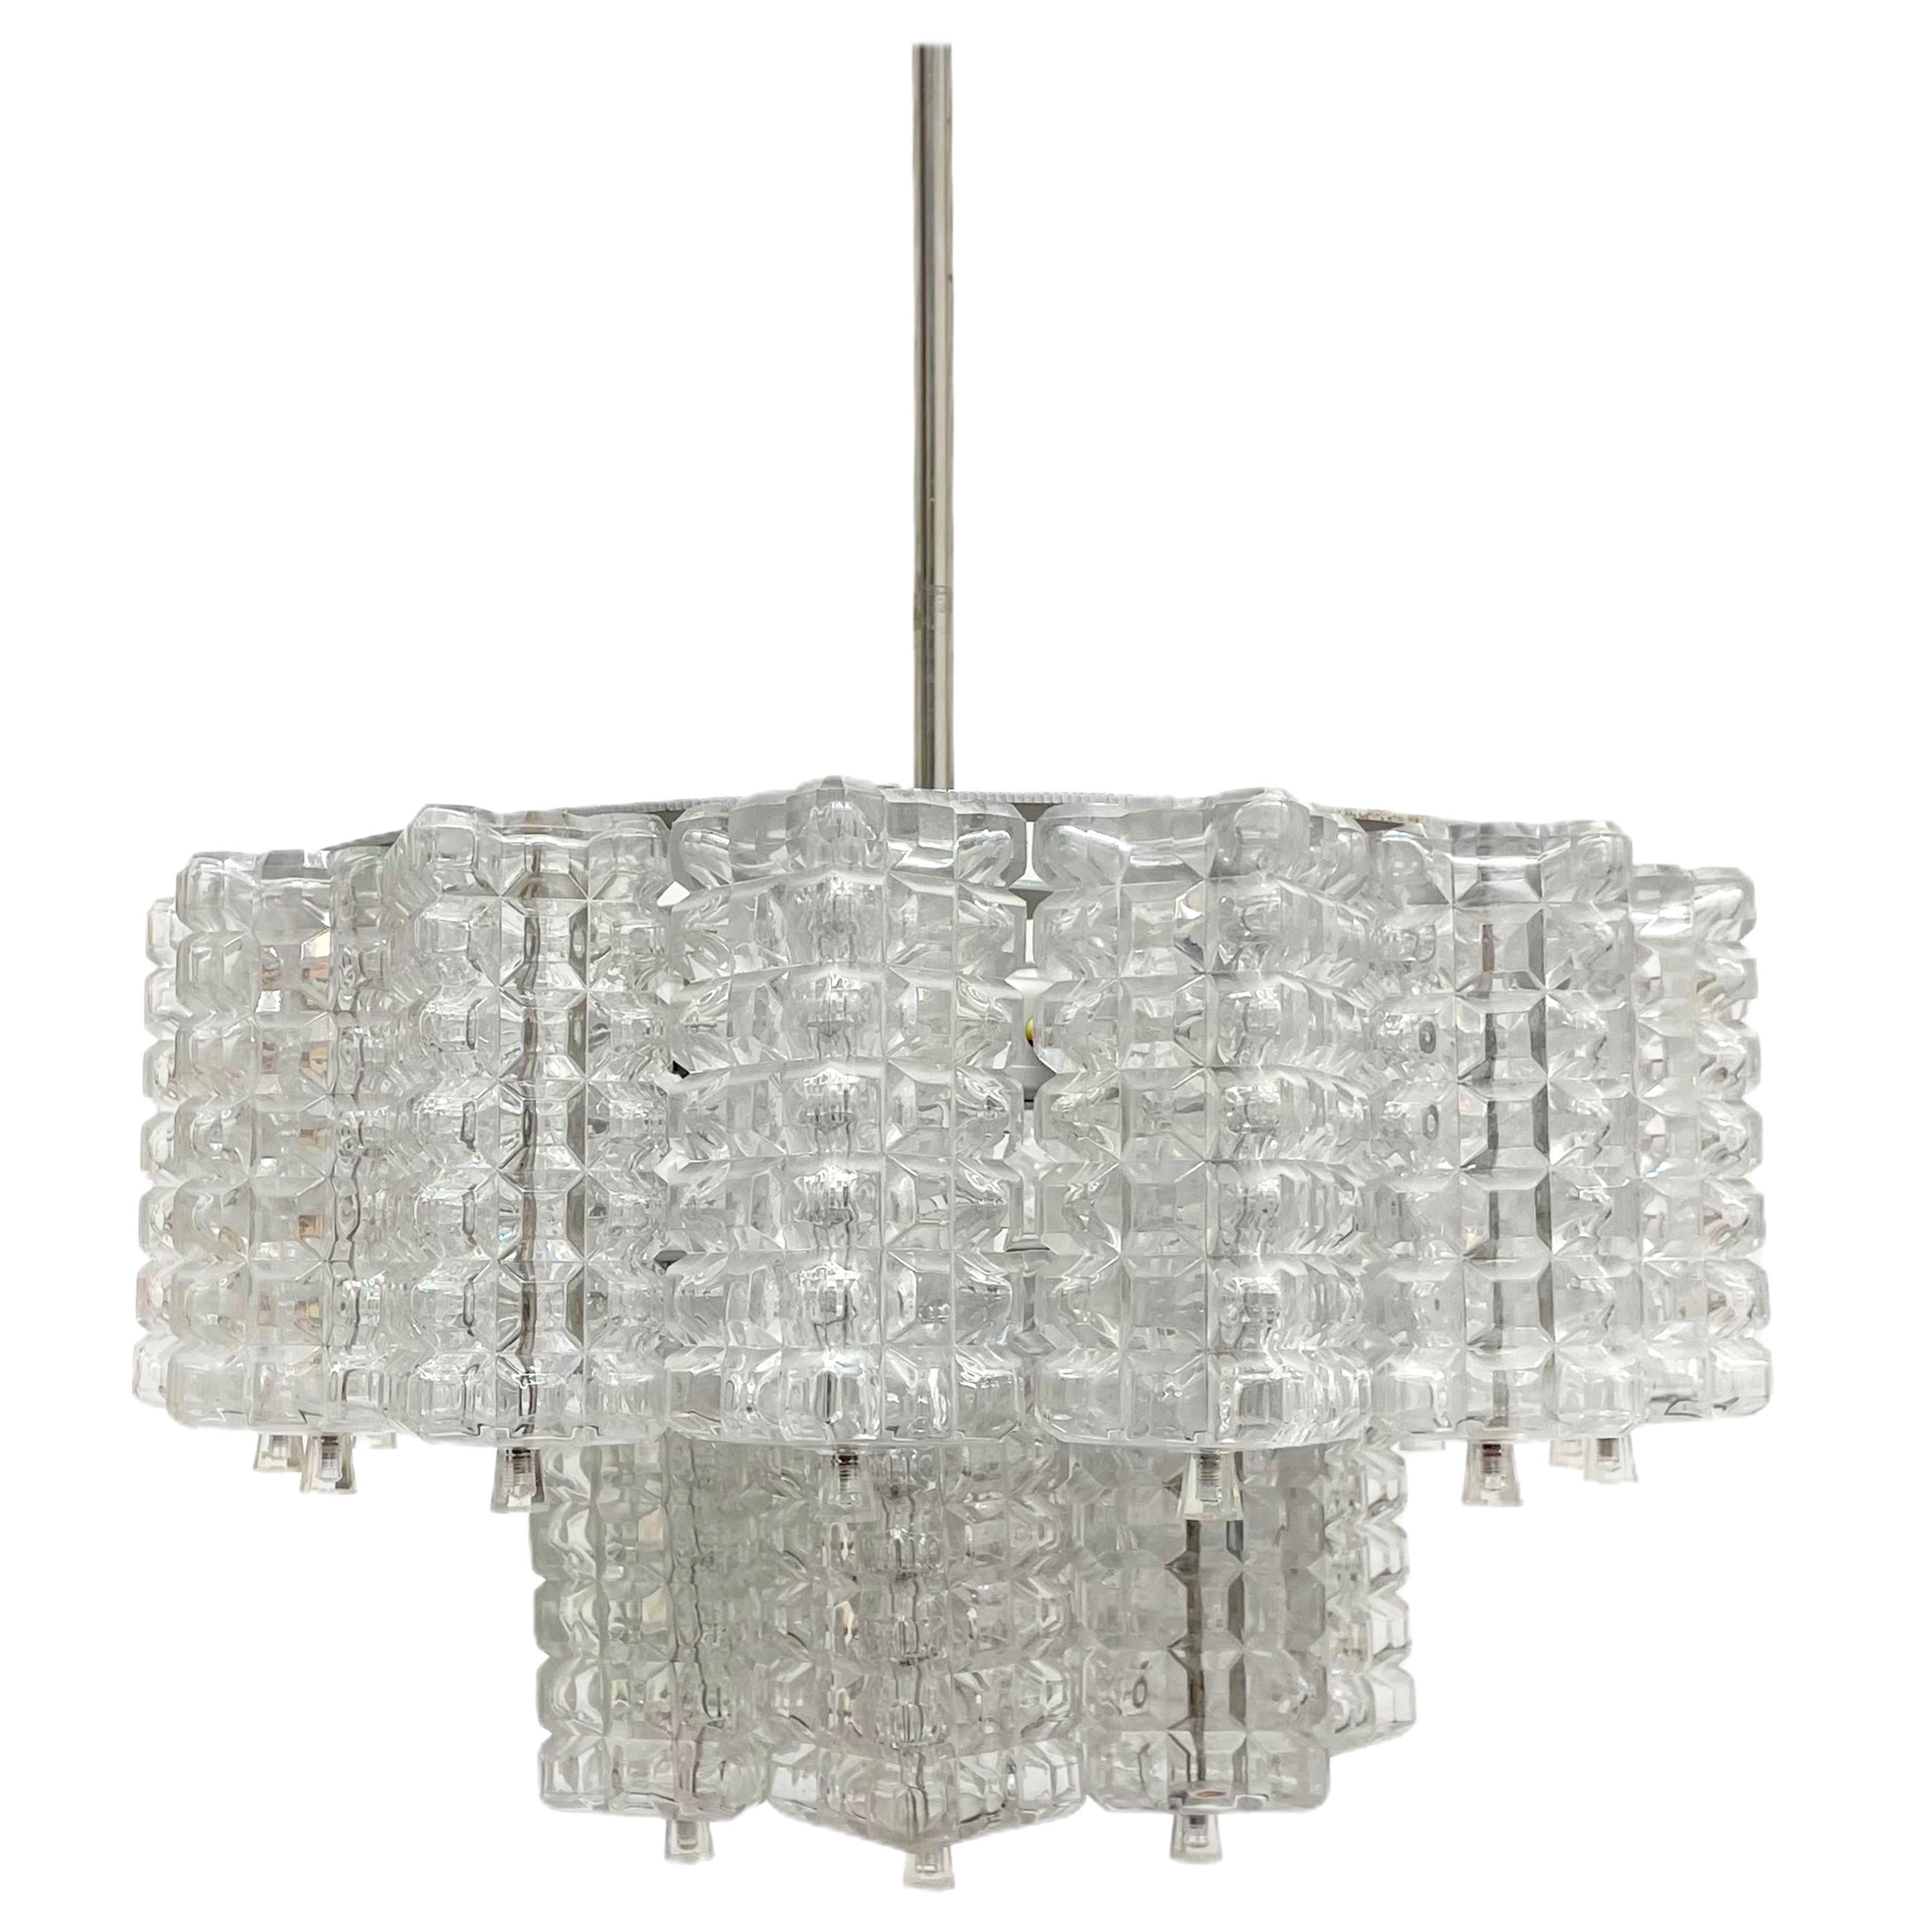 Two Tiered Glass Cube Chandelier by Austrolux, Austria, 1960s